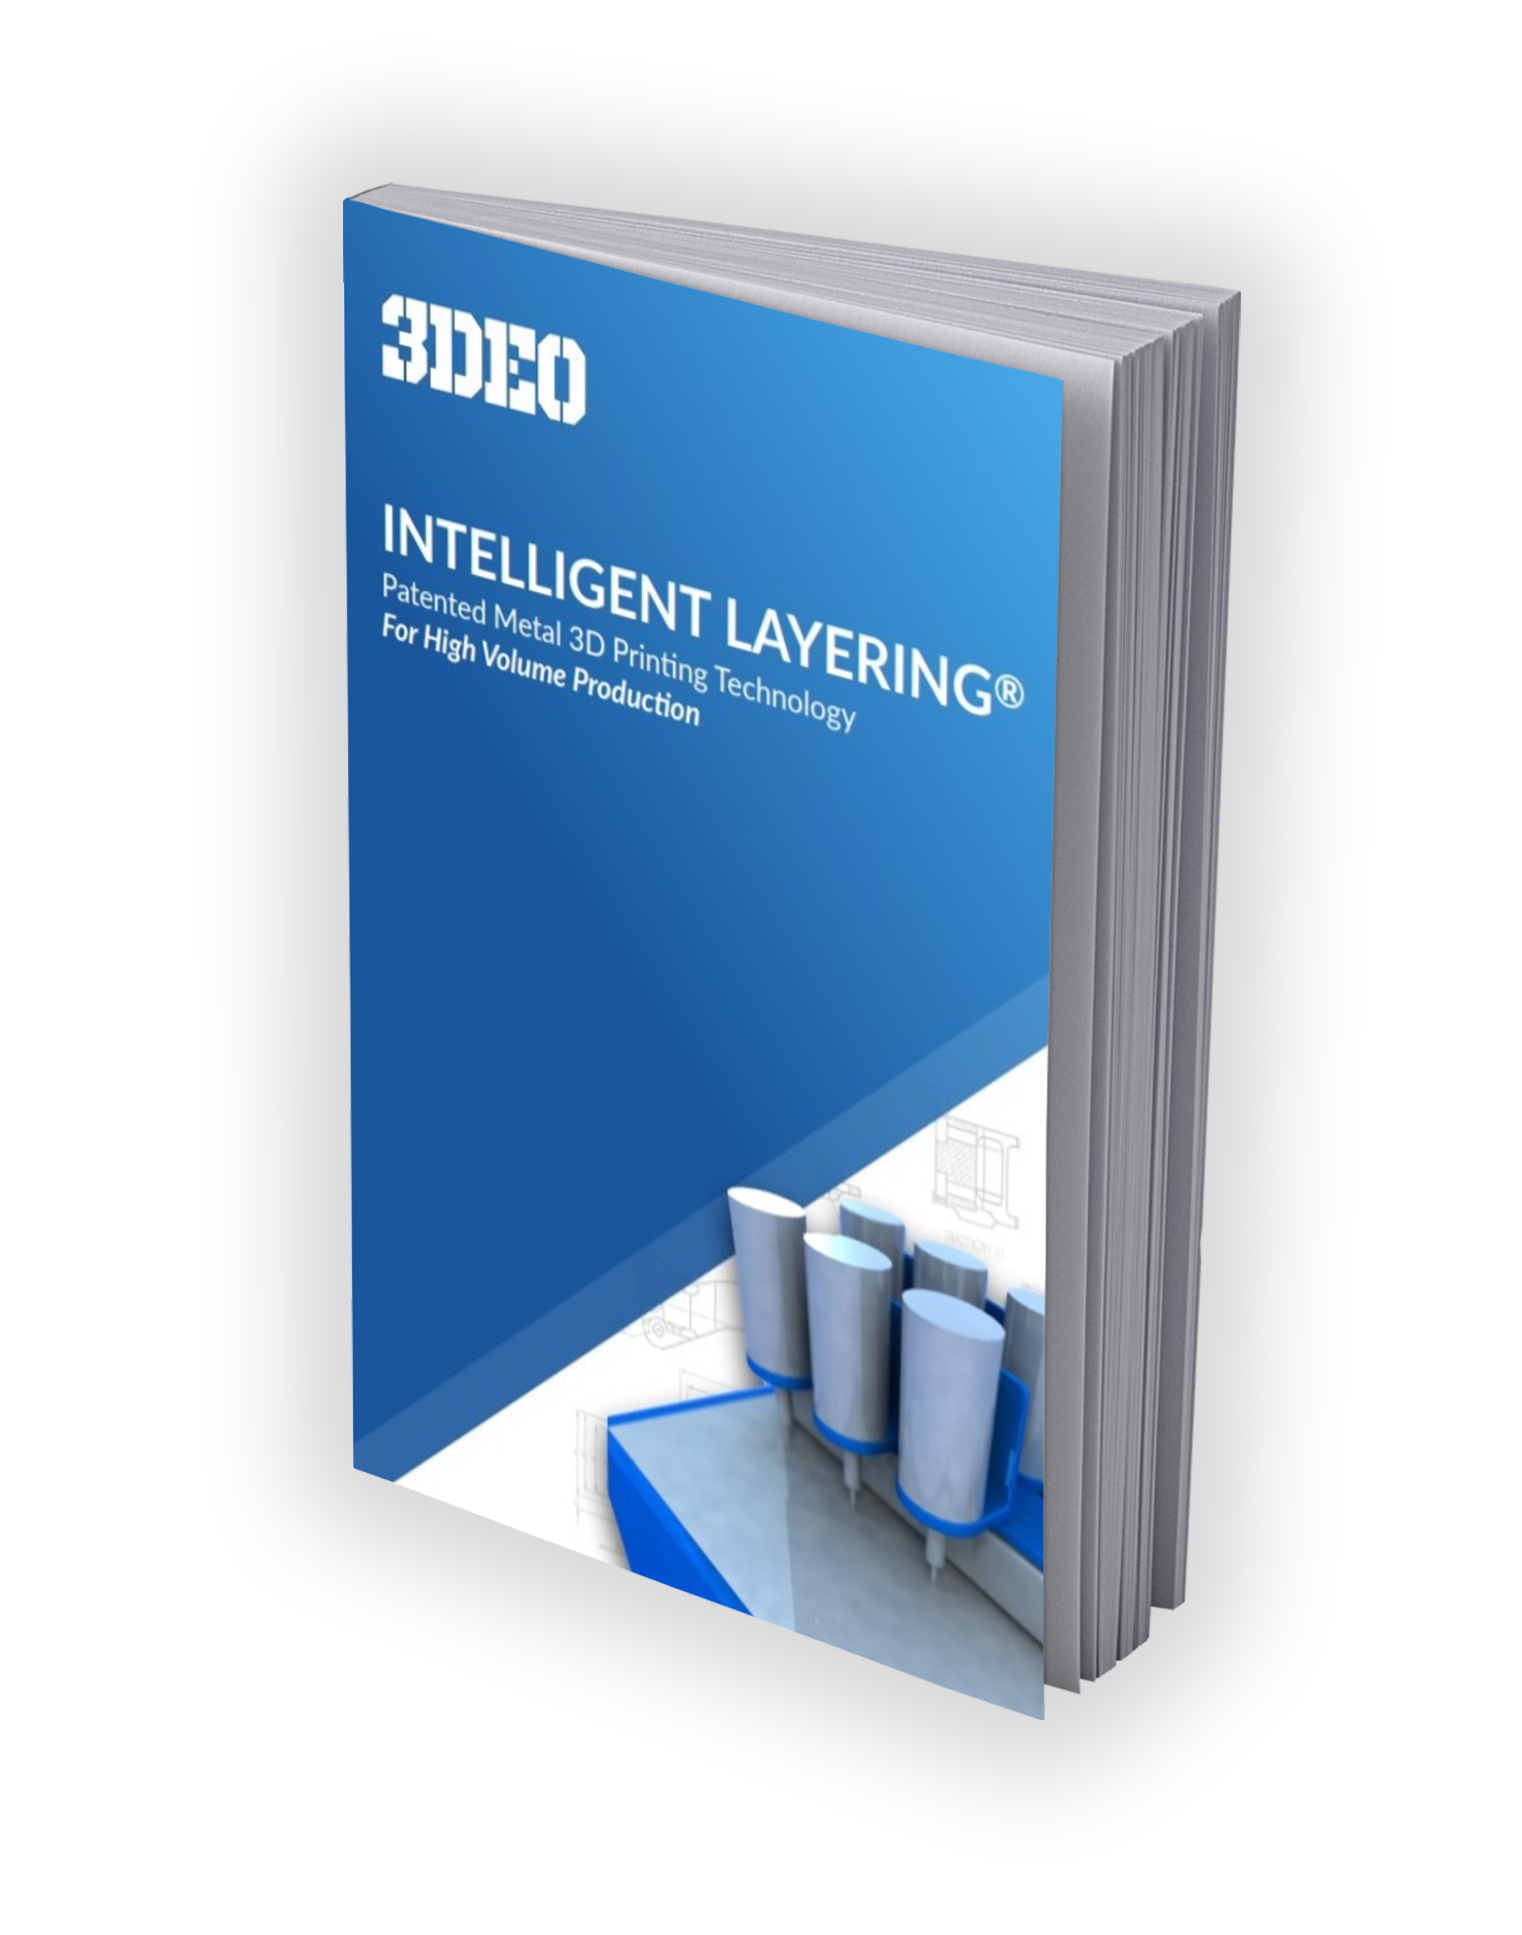 A 3d book cover featuring the title "intelligent layering" with images of metal 3d printing technology and the logo of 3deo.